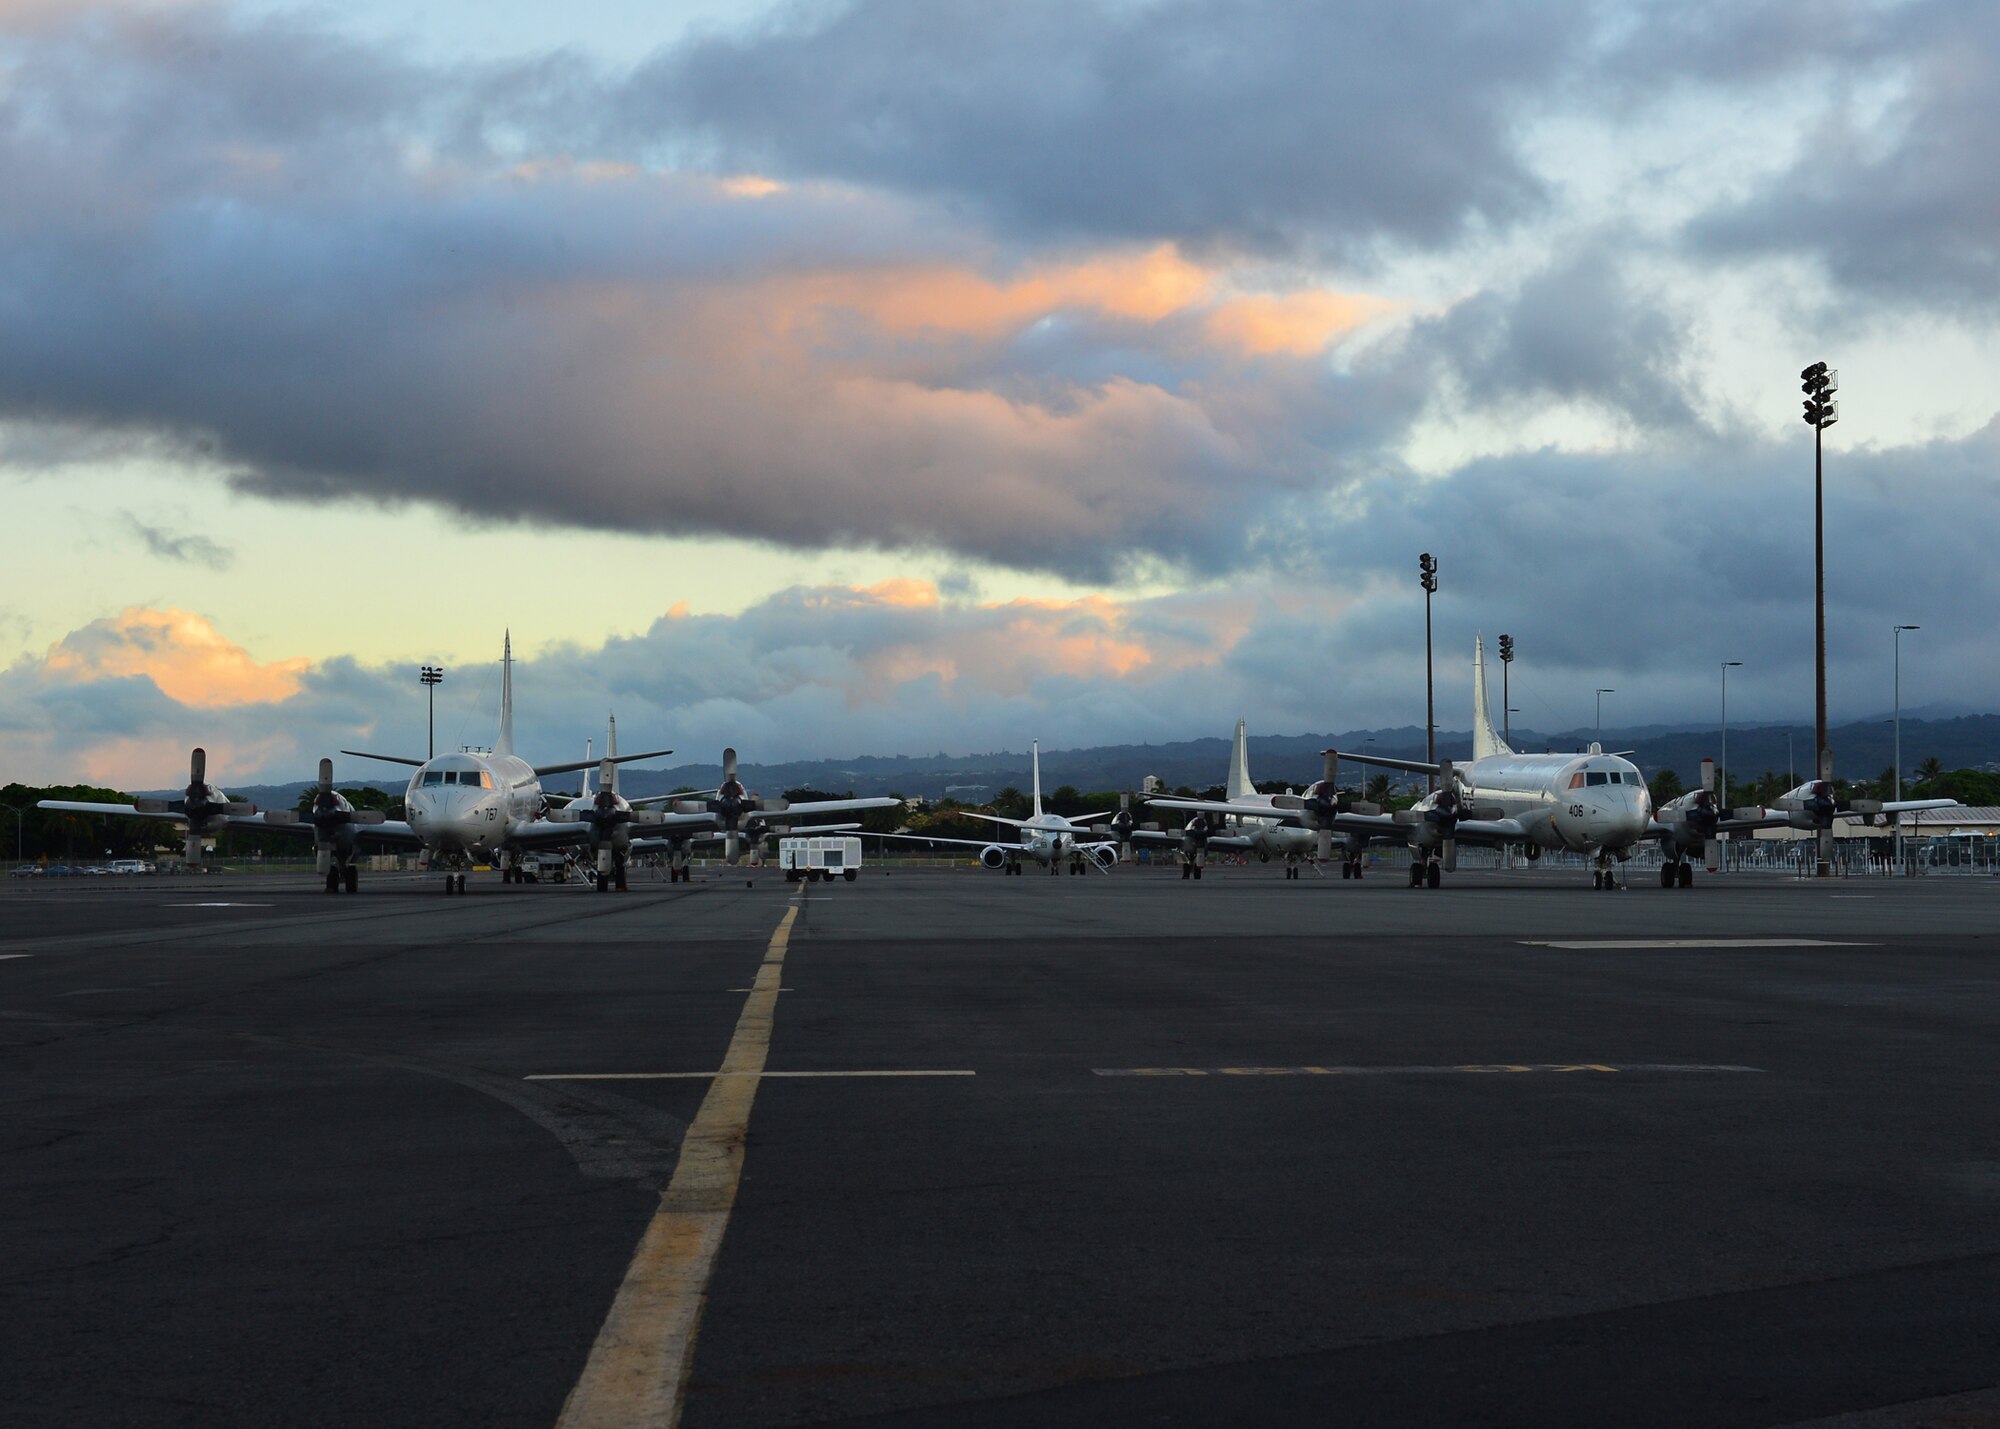 U.S. Navy P-3C Orion aircraft from Marine Corps Air Station Kaneohe Bay, Hawaii site on the flightline of Joint Base Pearl Harbor-Hickam during the Rim of the Pacific Exercises 11 June, 2016. Twenty-six nations, 49 ships, six submarines, about 200 aircraft, and 25,000 personnel are participating in Rim of the Pacific 2016 from June 29 to Aug. 4 in and around the Hawaiian Islands and Southern California. The world’s largest international maritime exercise, RIMPAC provides a unique training opportunity while fostering and sustaining cooperative relationships between participants critical to ensuring the safety of sea lanes and security on the world’s oceans. RIMPAC 16 is the 25th exercise in the series that began in 1971. (U.S. Air Force photo by Tech. Sgt. Aaron Oelrich) 

